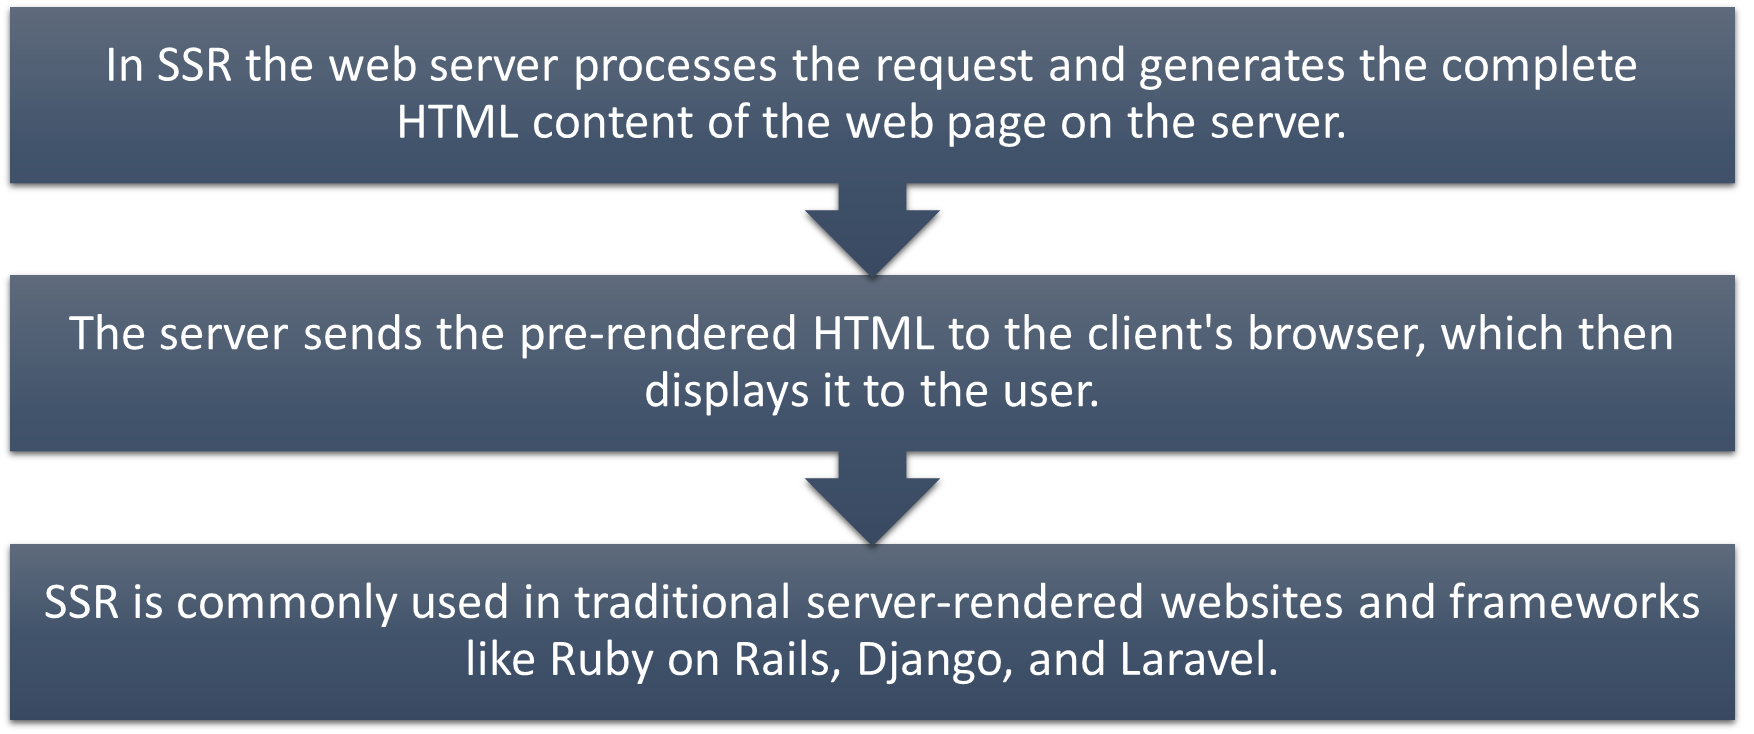 Server Side Rendering Process for a Web Page